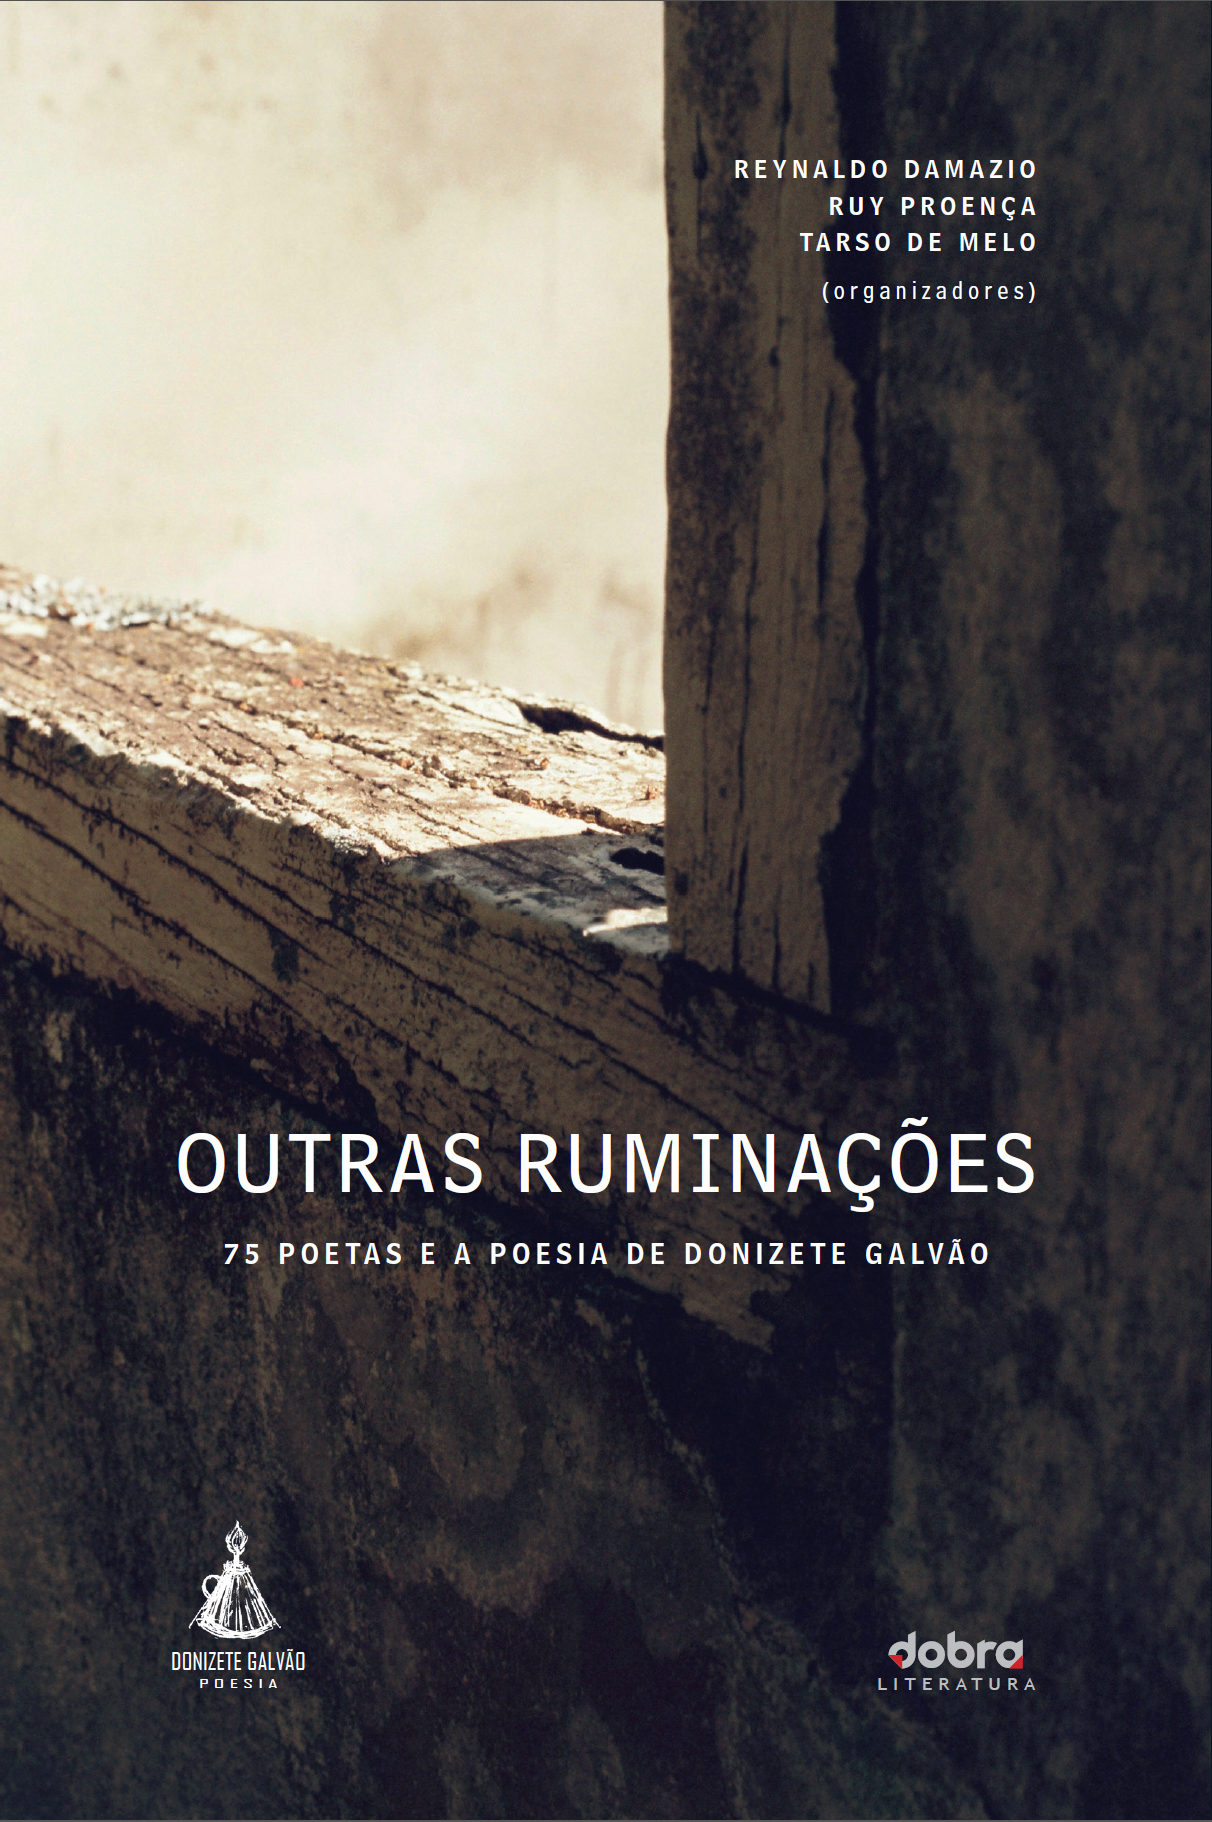 Outras ruminaes